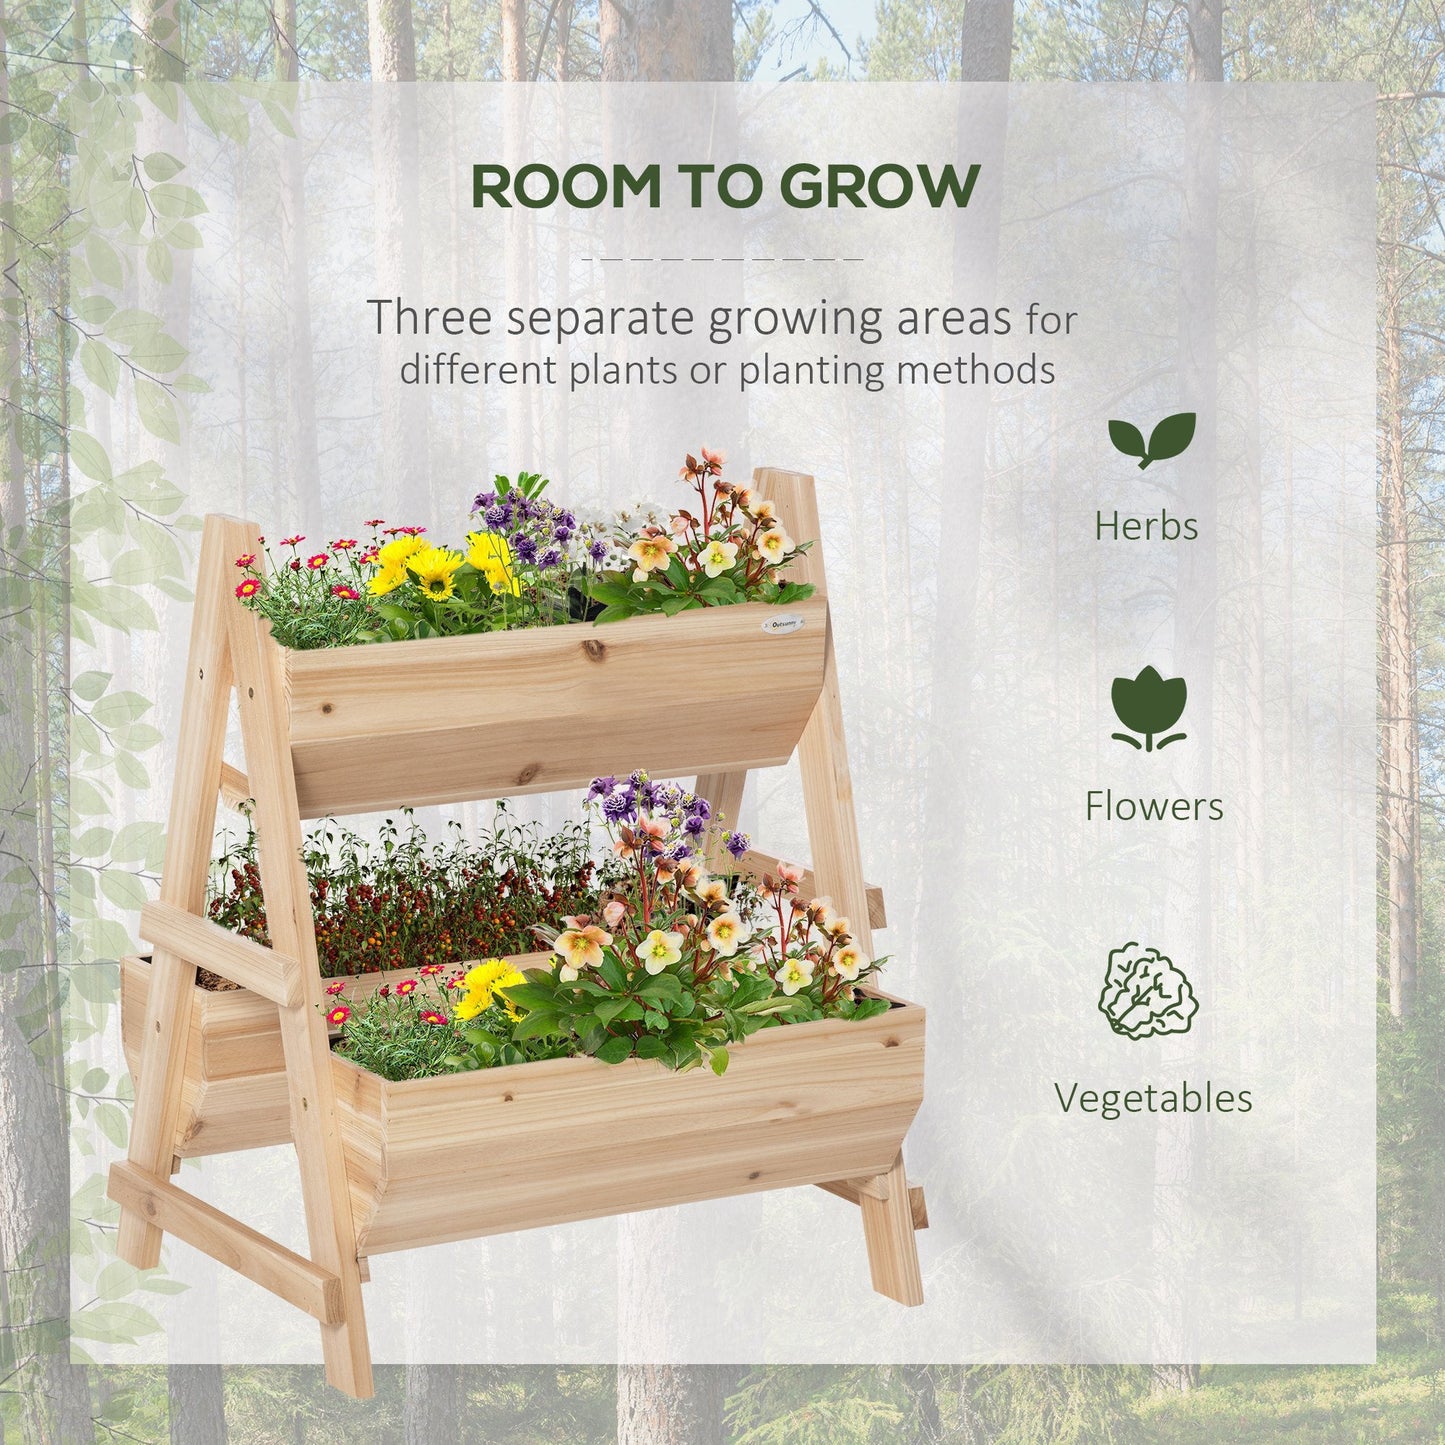 Outdoor and Garden-Raised Garden Bed, 2 Tier Planter Box with Stand, Nonwoven Fabric for Vegetables, Herbs, Flowers, 26.75" x 22.75" x 31.75", Natural - Outdoor Style Company